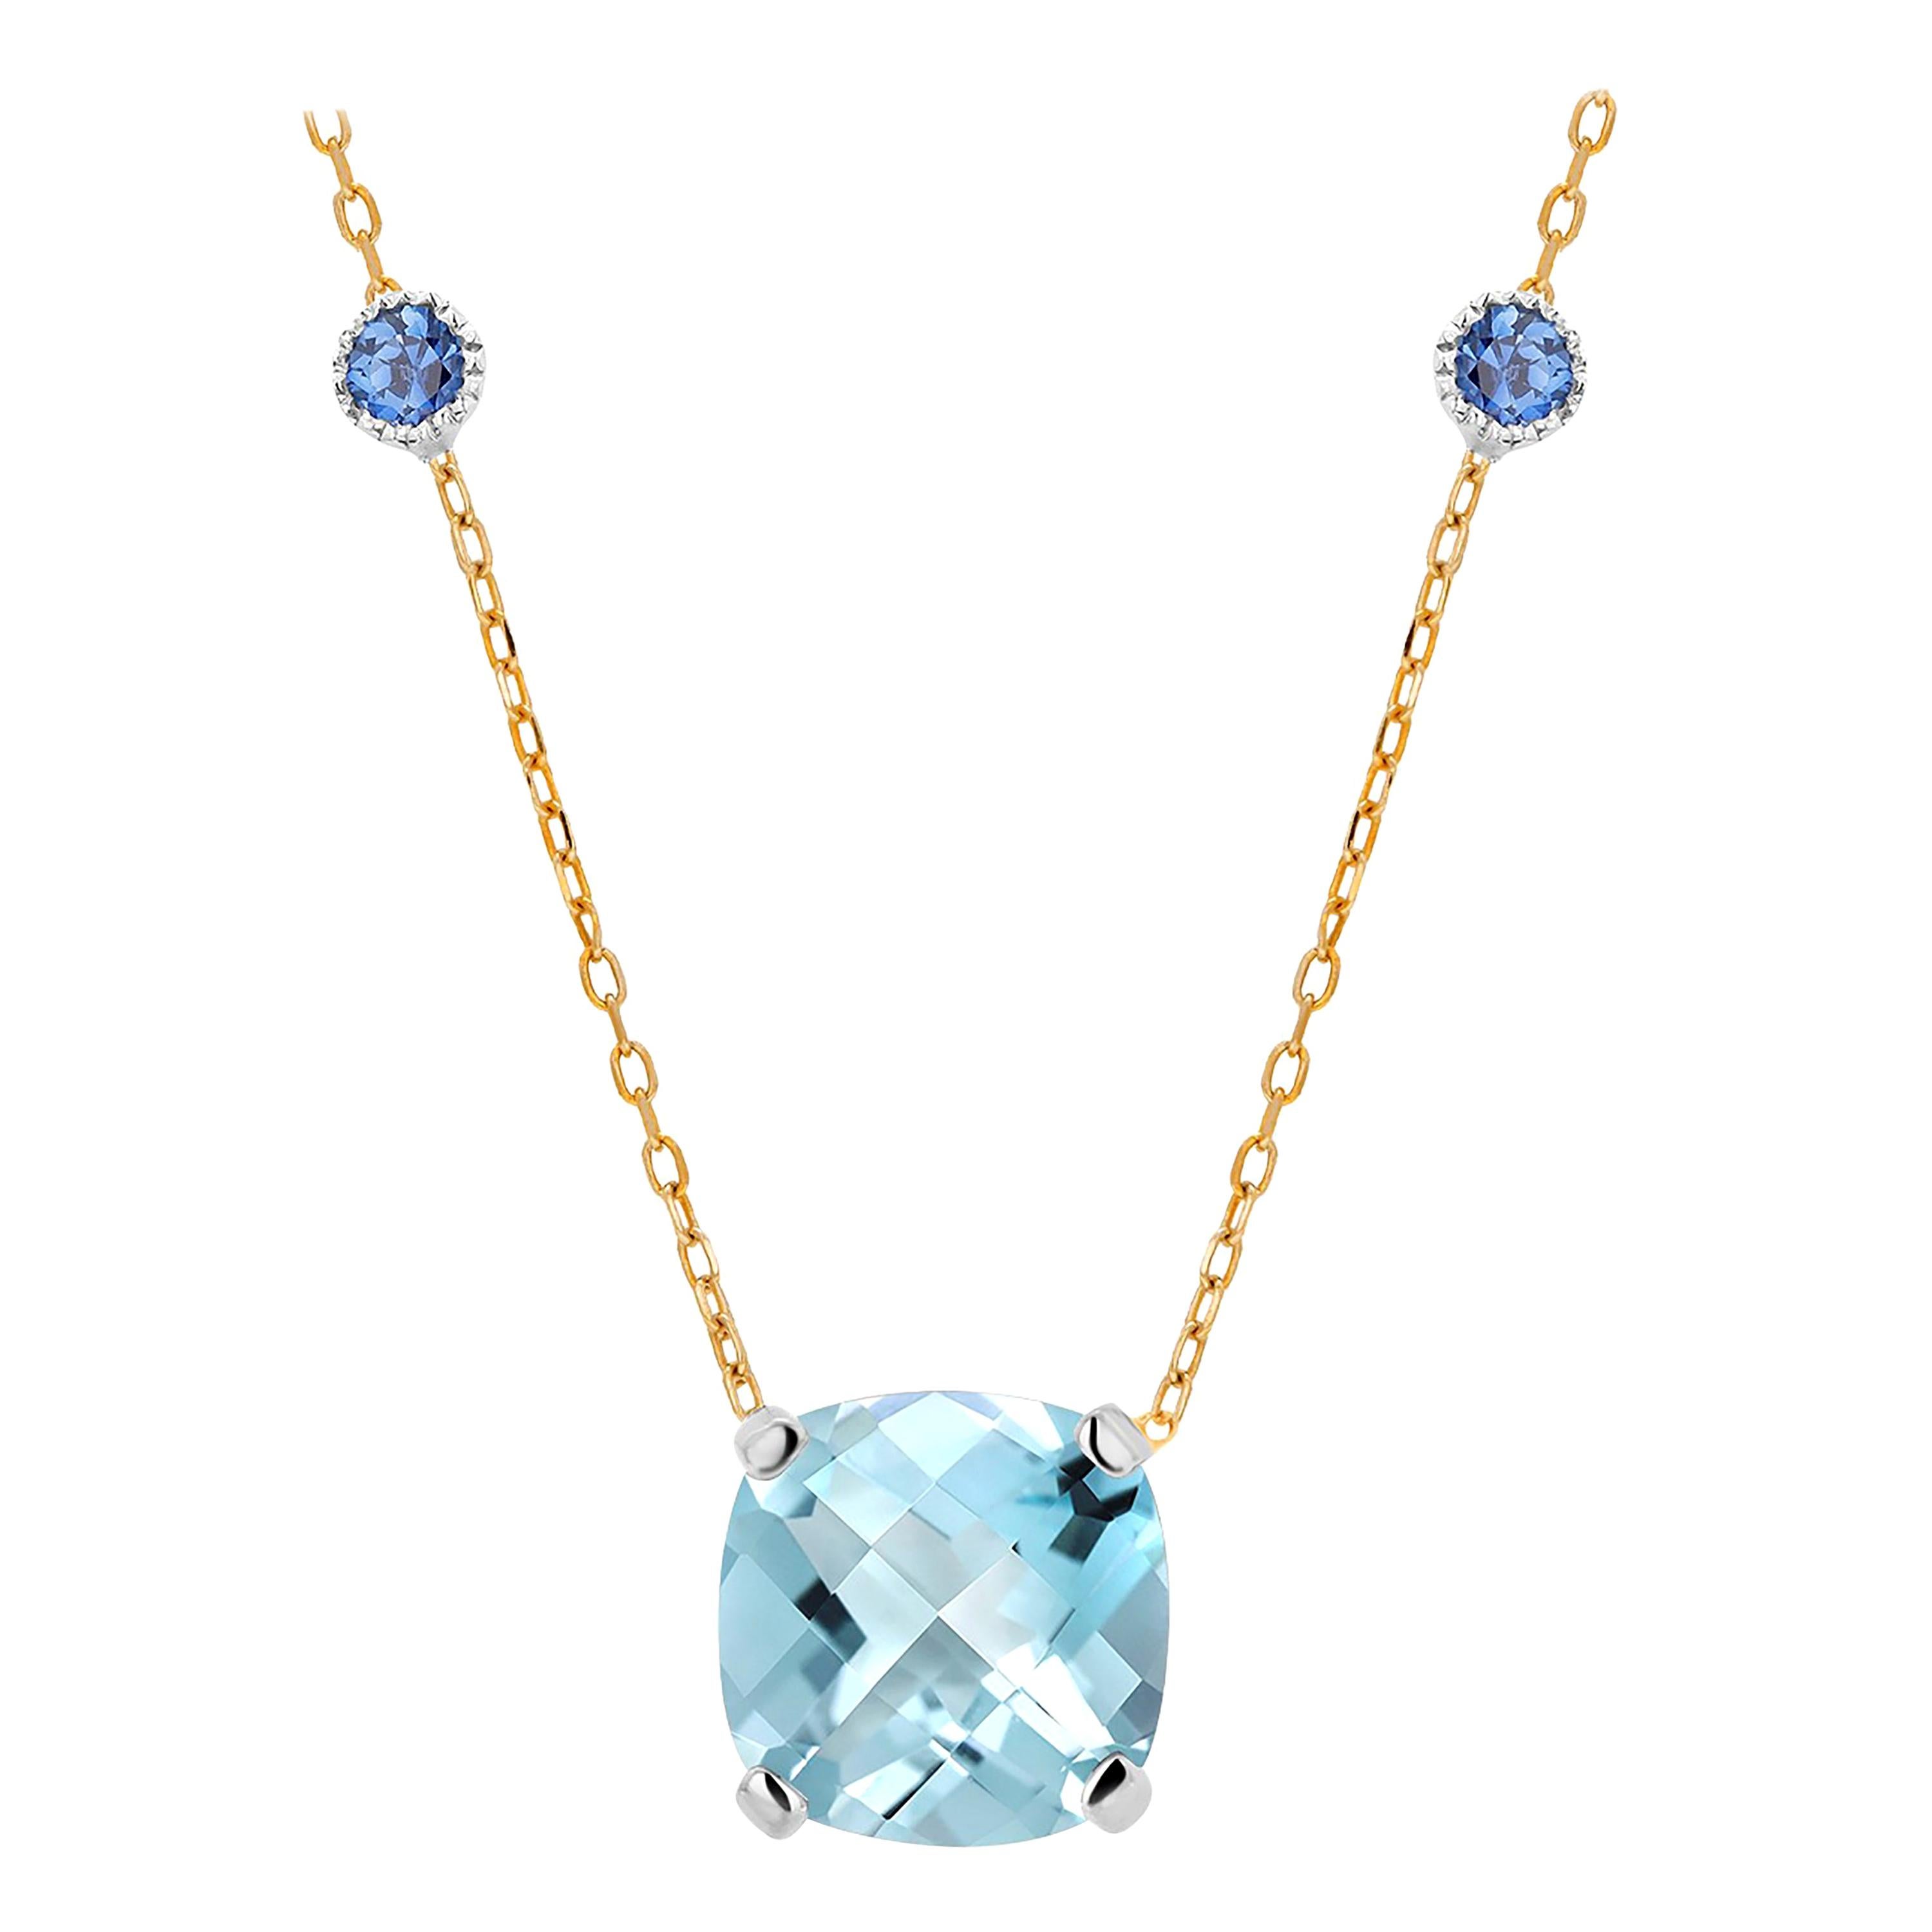 Cushion Shaped Aquamarine and Sapphire White and Yellow Gold Pendant Necklace